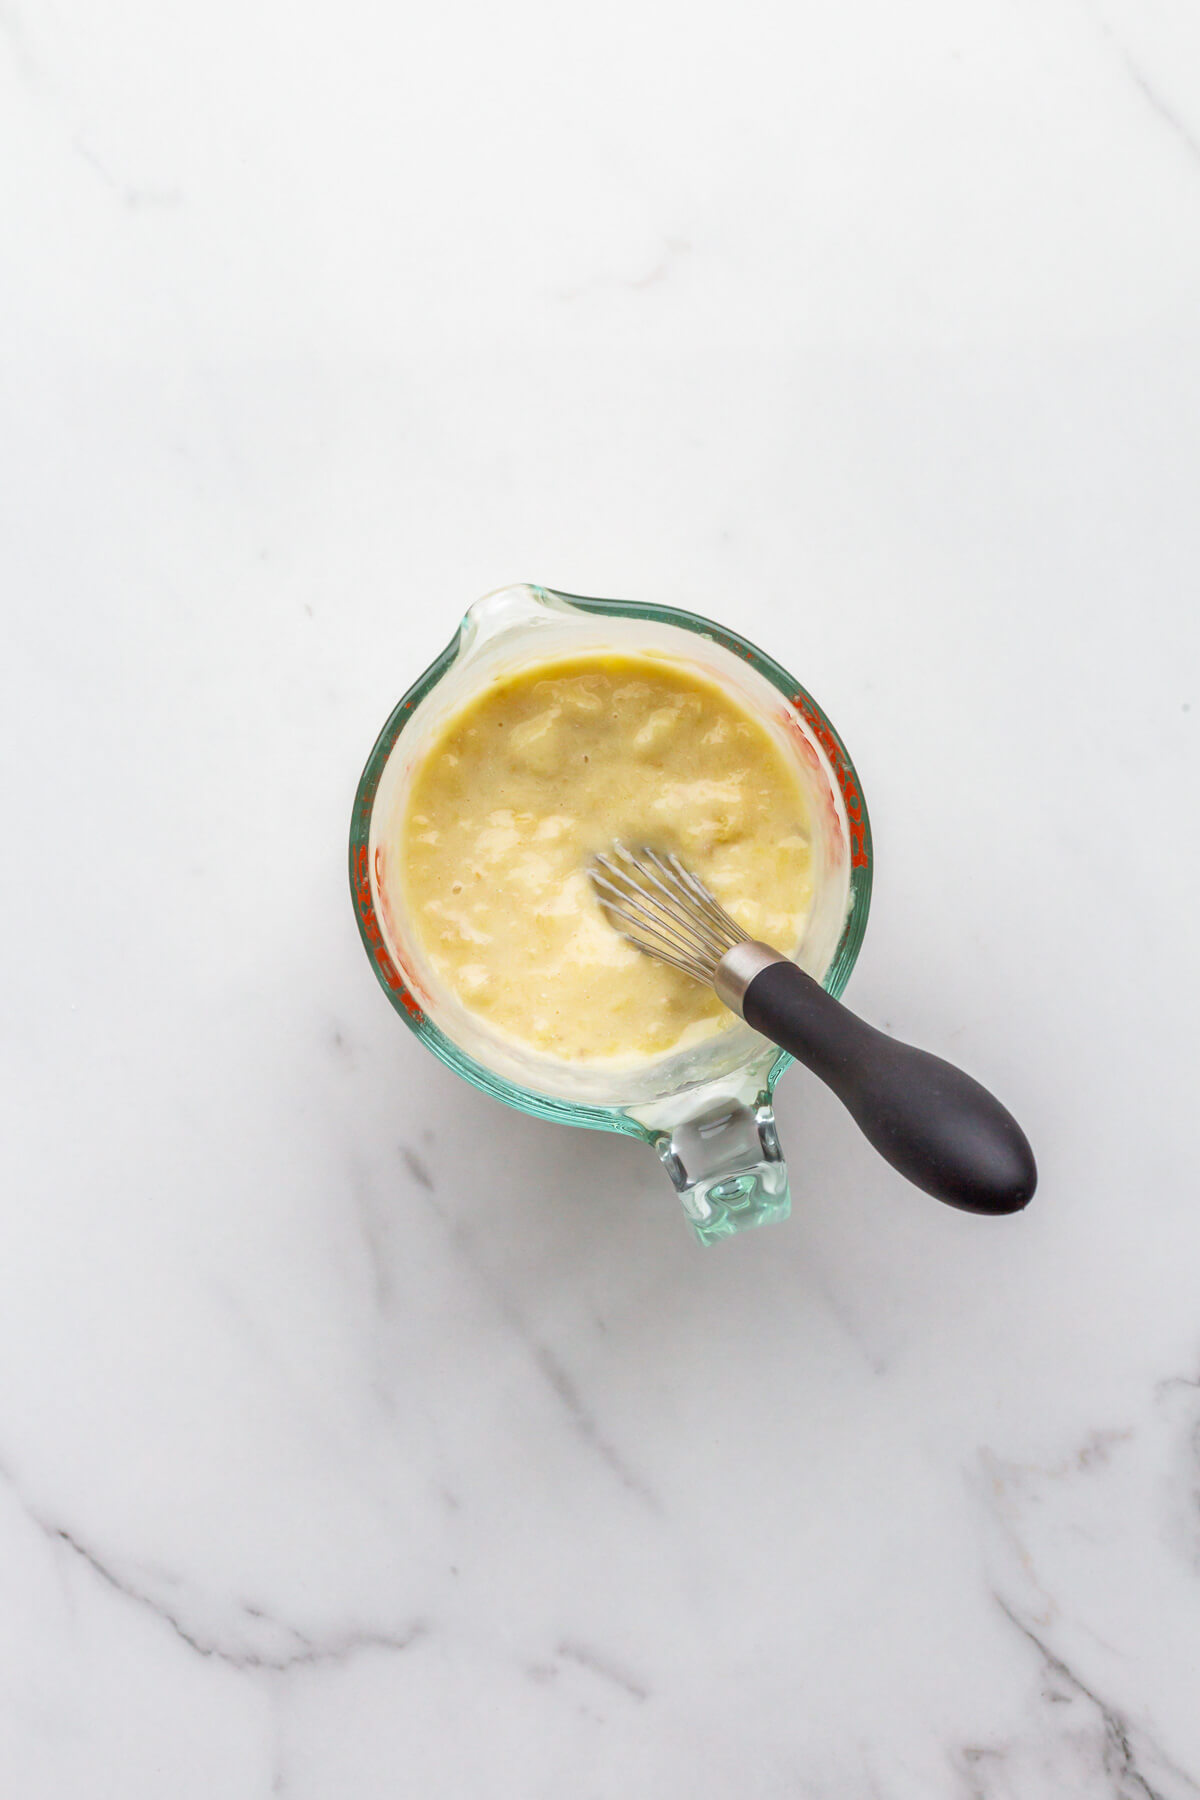 Banana and sour cream whisked together in a spouted measuring cup.